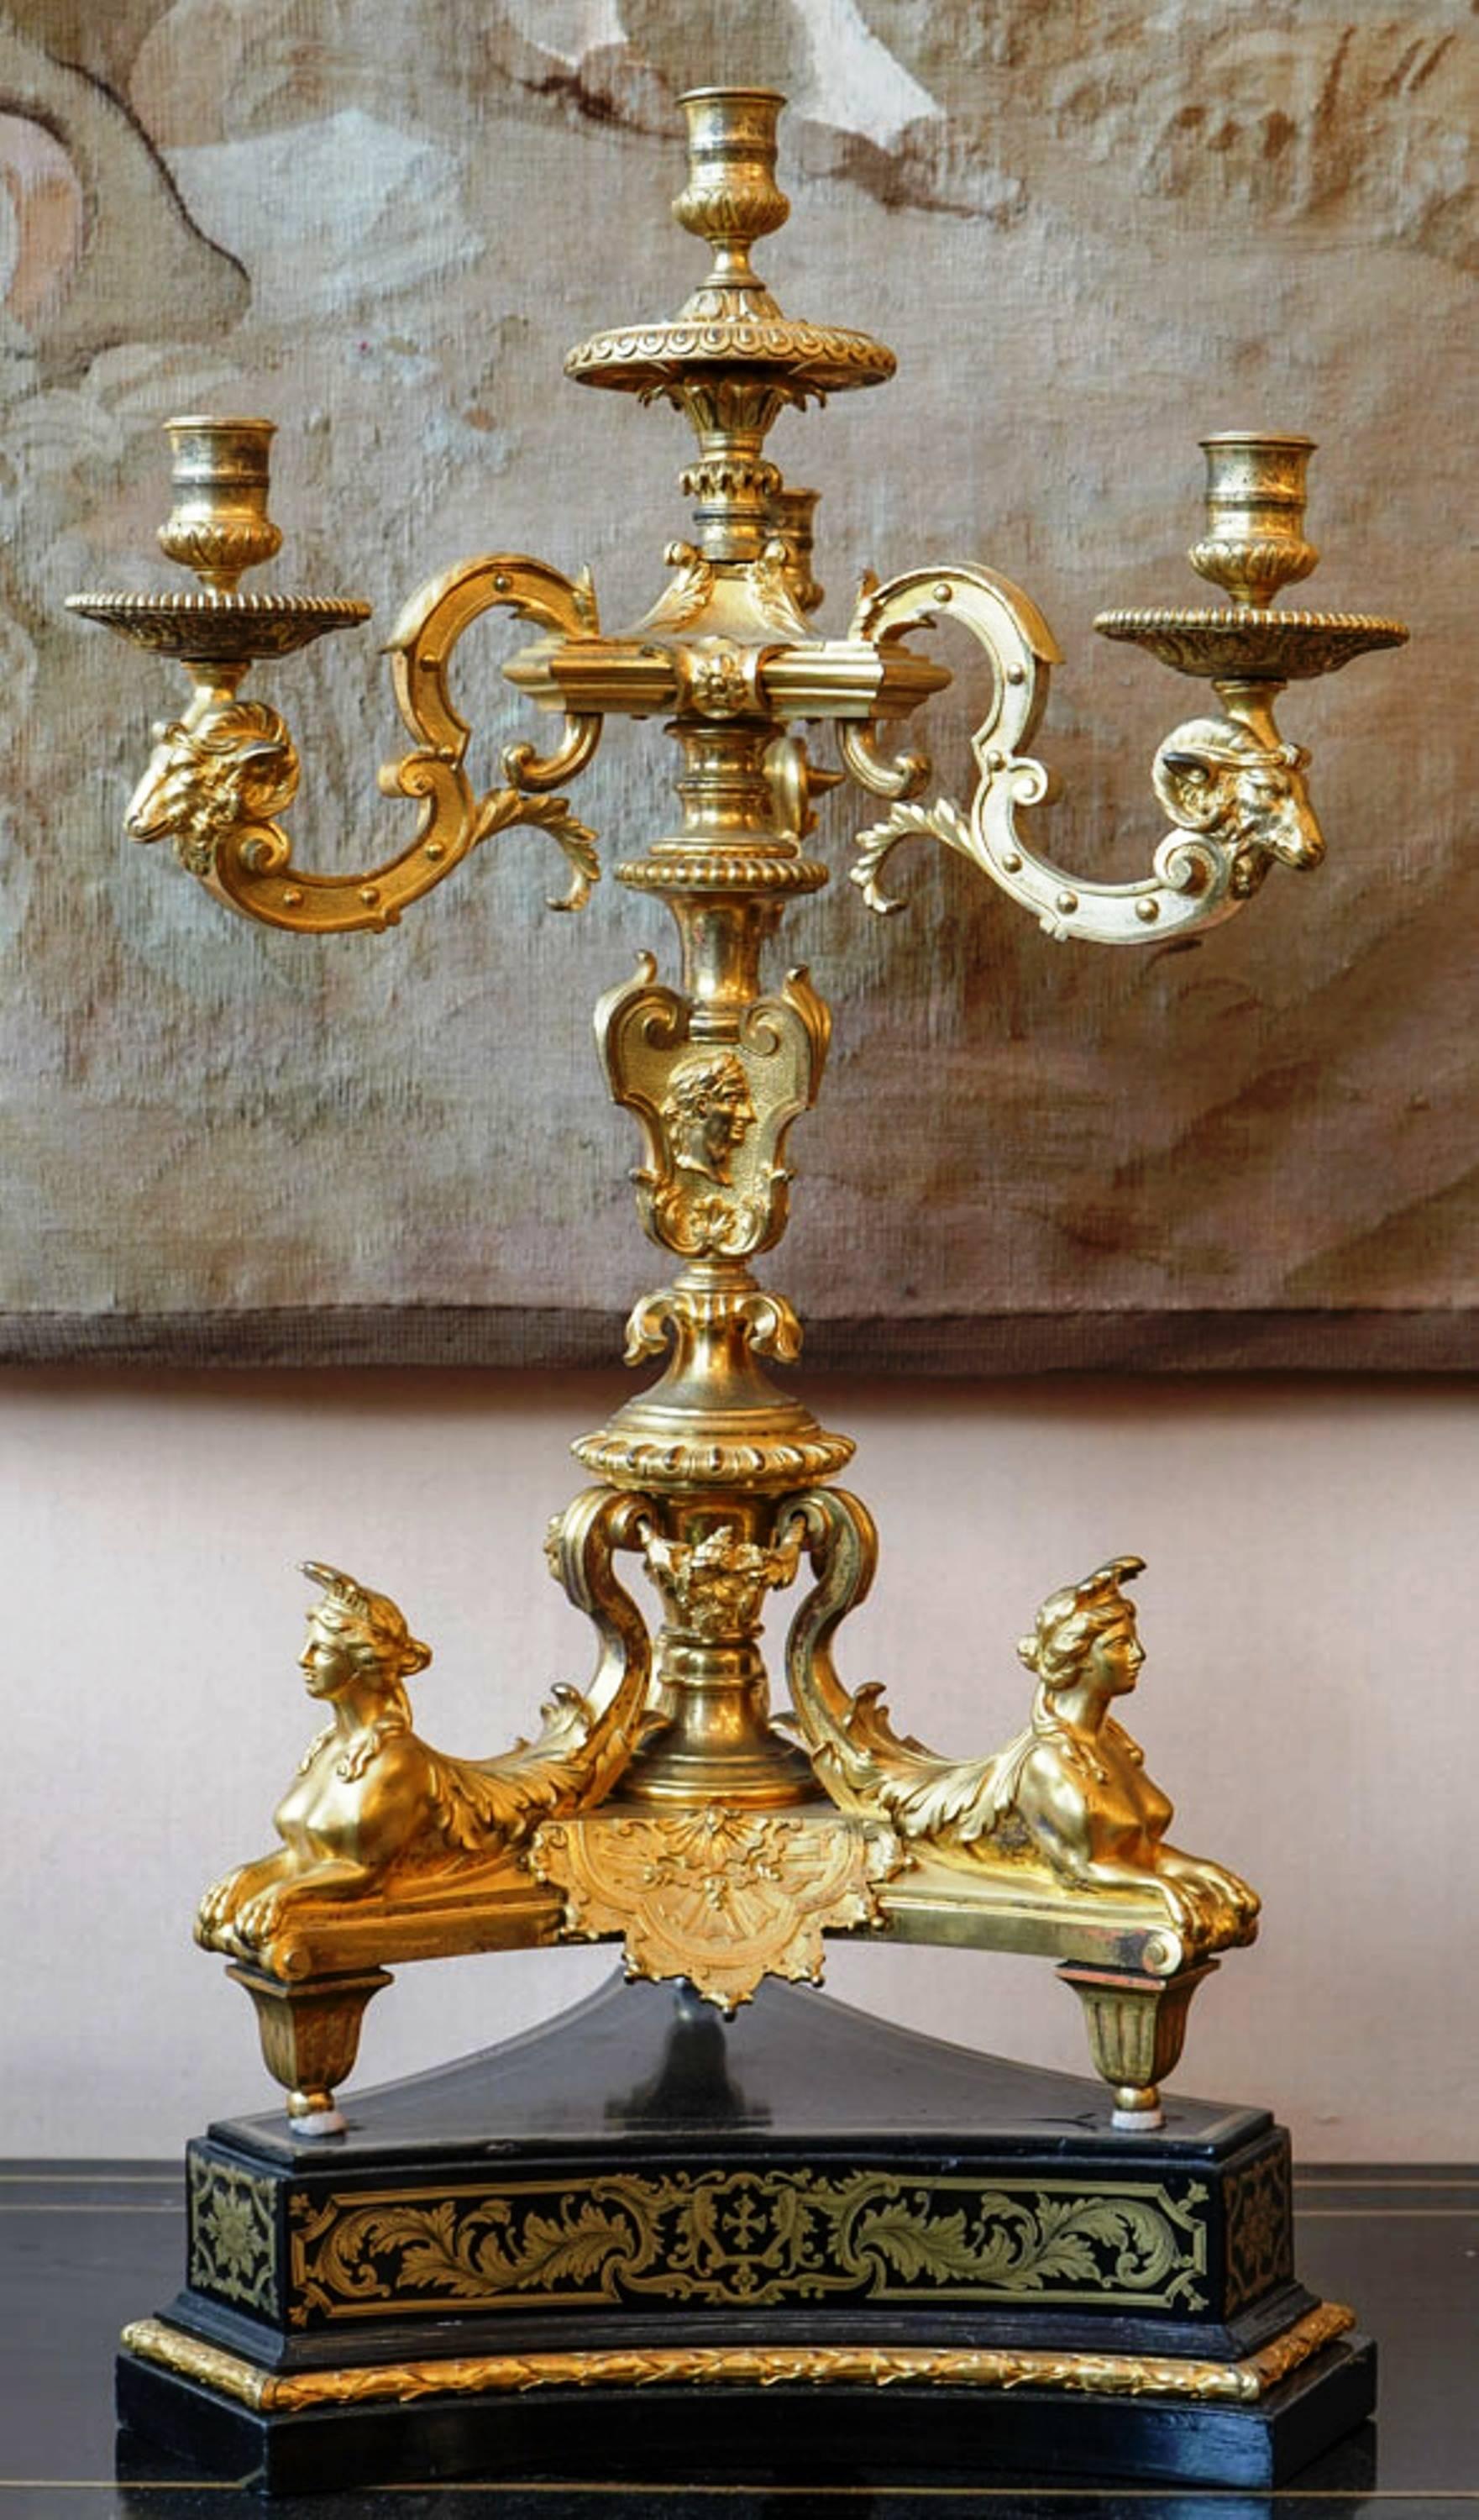 Splendid pair of candelabras, gilt bronze, Louis XIV style, France, circa 1880.
After a model by André Charles Boulle.
The base carved in ebony with copper ingravings, ty pical of the Boulle workshop.
They are decorated with sphinxes and heads of